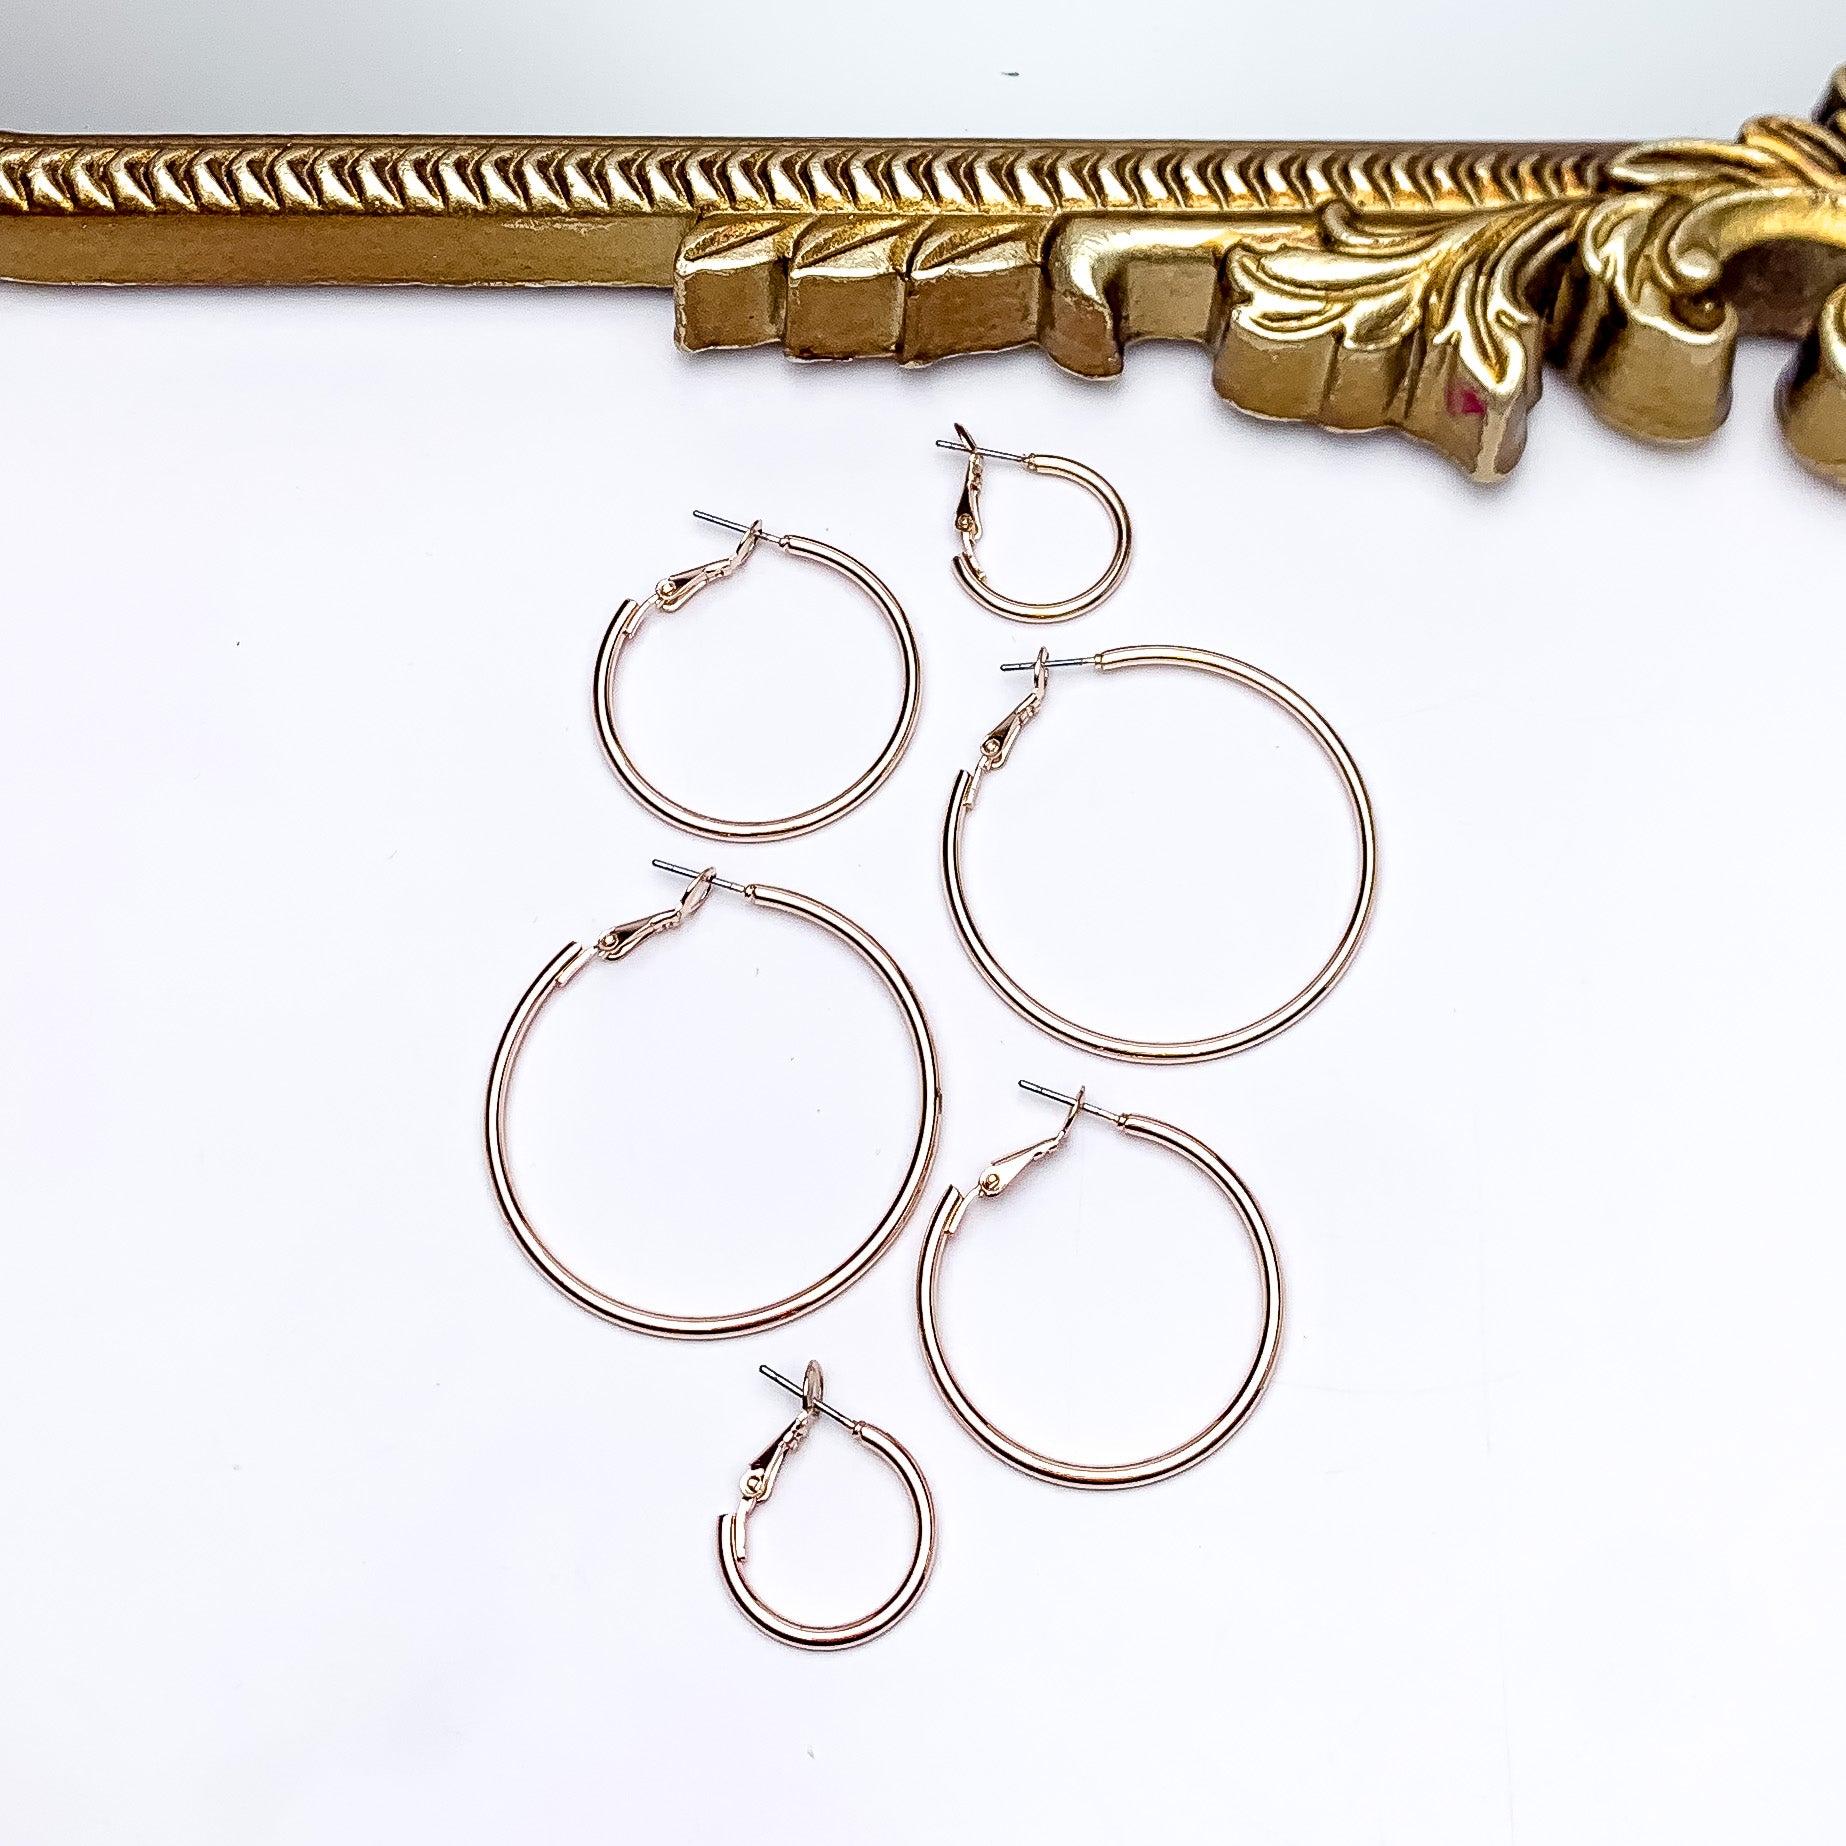 Set Of Three | Hoop Earrings in Rose Gold Tone. Pictured on a white background with a gold frame above the earrings. There are three different sizes of earrings all in the picture.